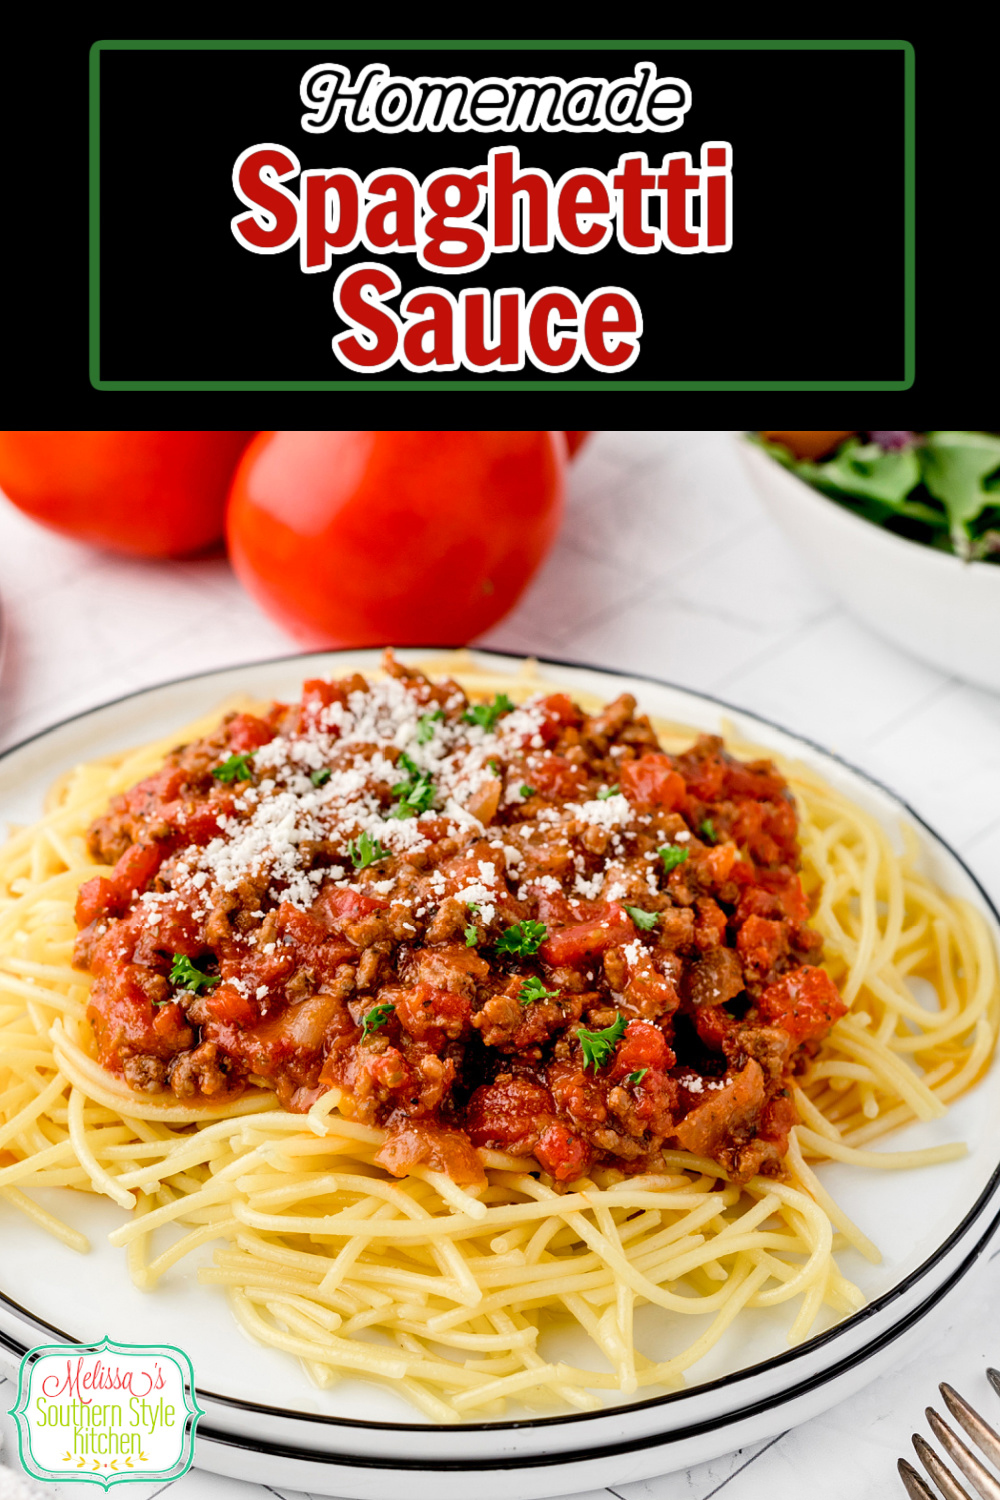 Serve this Homemade Spaghetti Sauce over cooked spaghetti topped with a sprinkle of grated Parmesan cheese and parsley #spaghettisauce #easygroundbeefrecipes #homemadepaghettisauce #Italianfood #spaghettirecipes #bestspaghettisaucerecipe